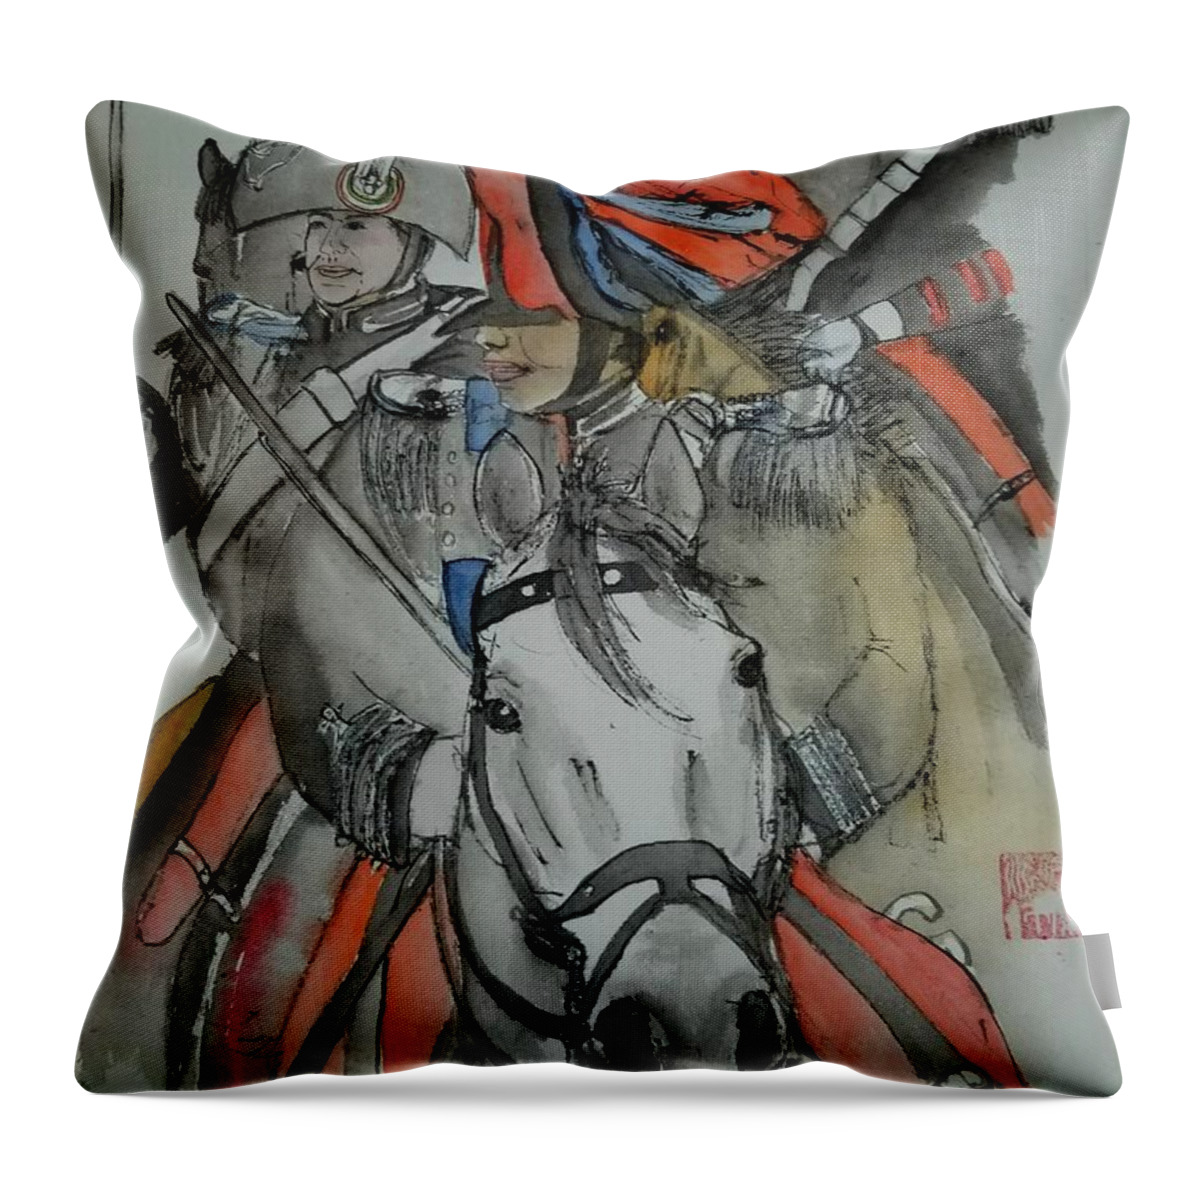 Il Palio. Siena. Italy. Horse Race. Event. Medieval Throw Pillow featuring the painting Il Palio vita album #1 by Debbi Saccomanno Chan